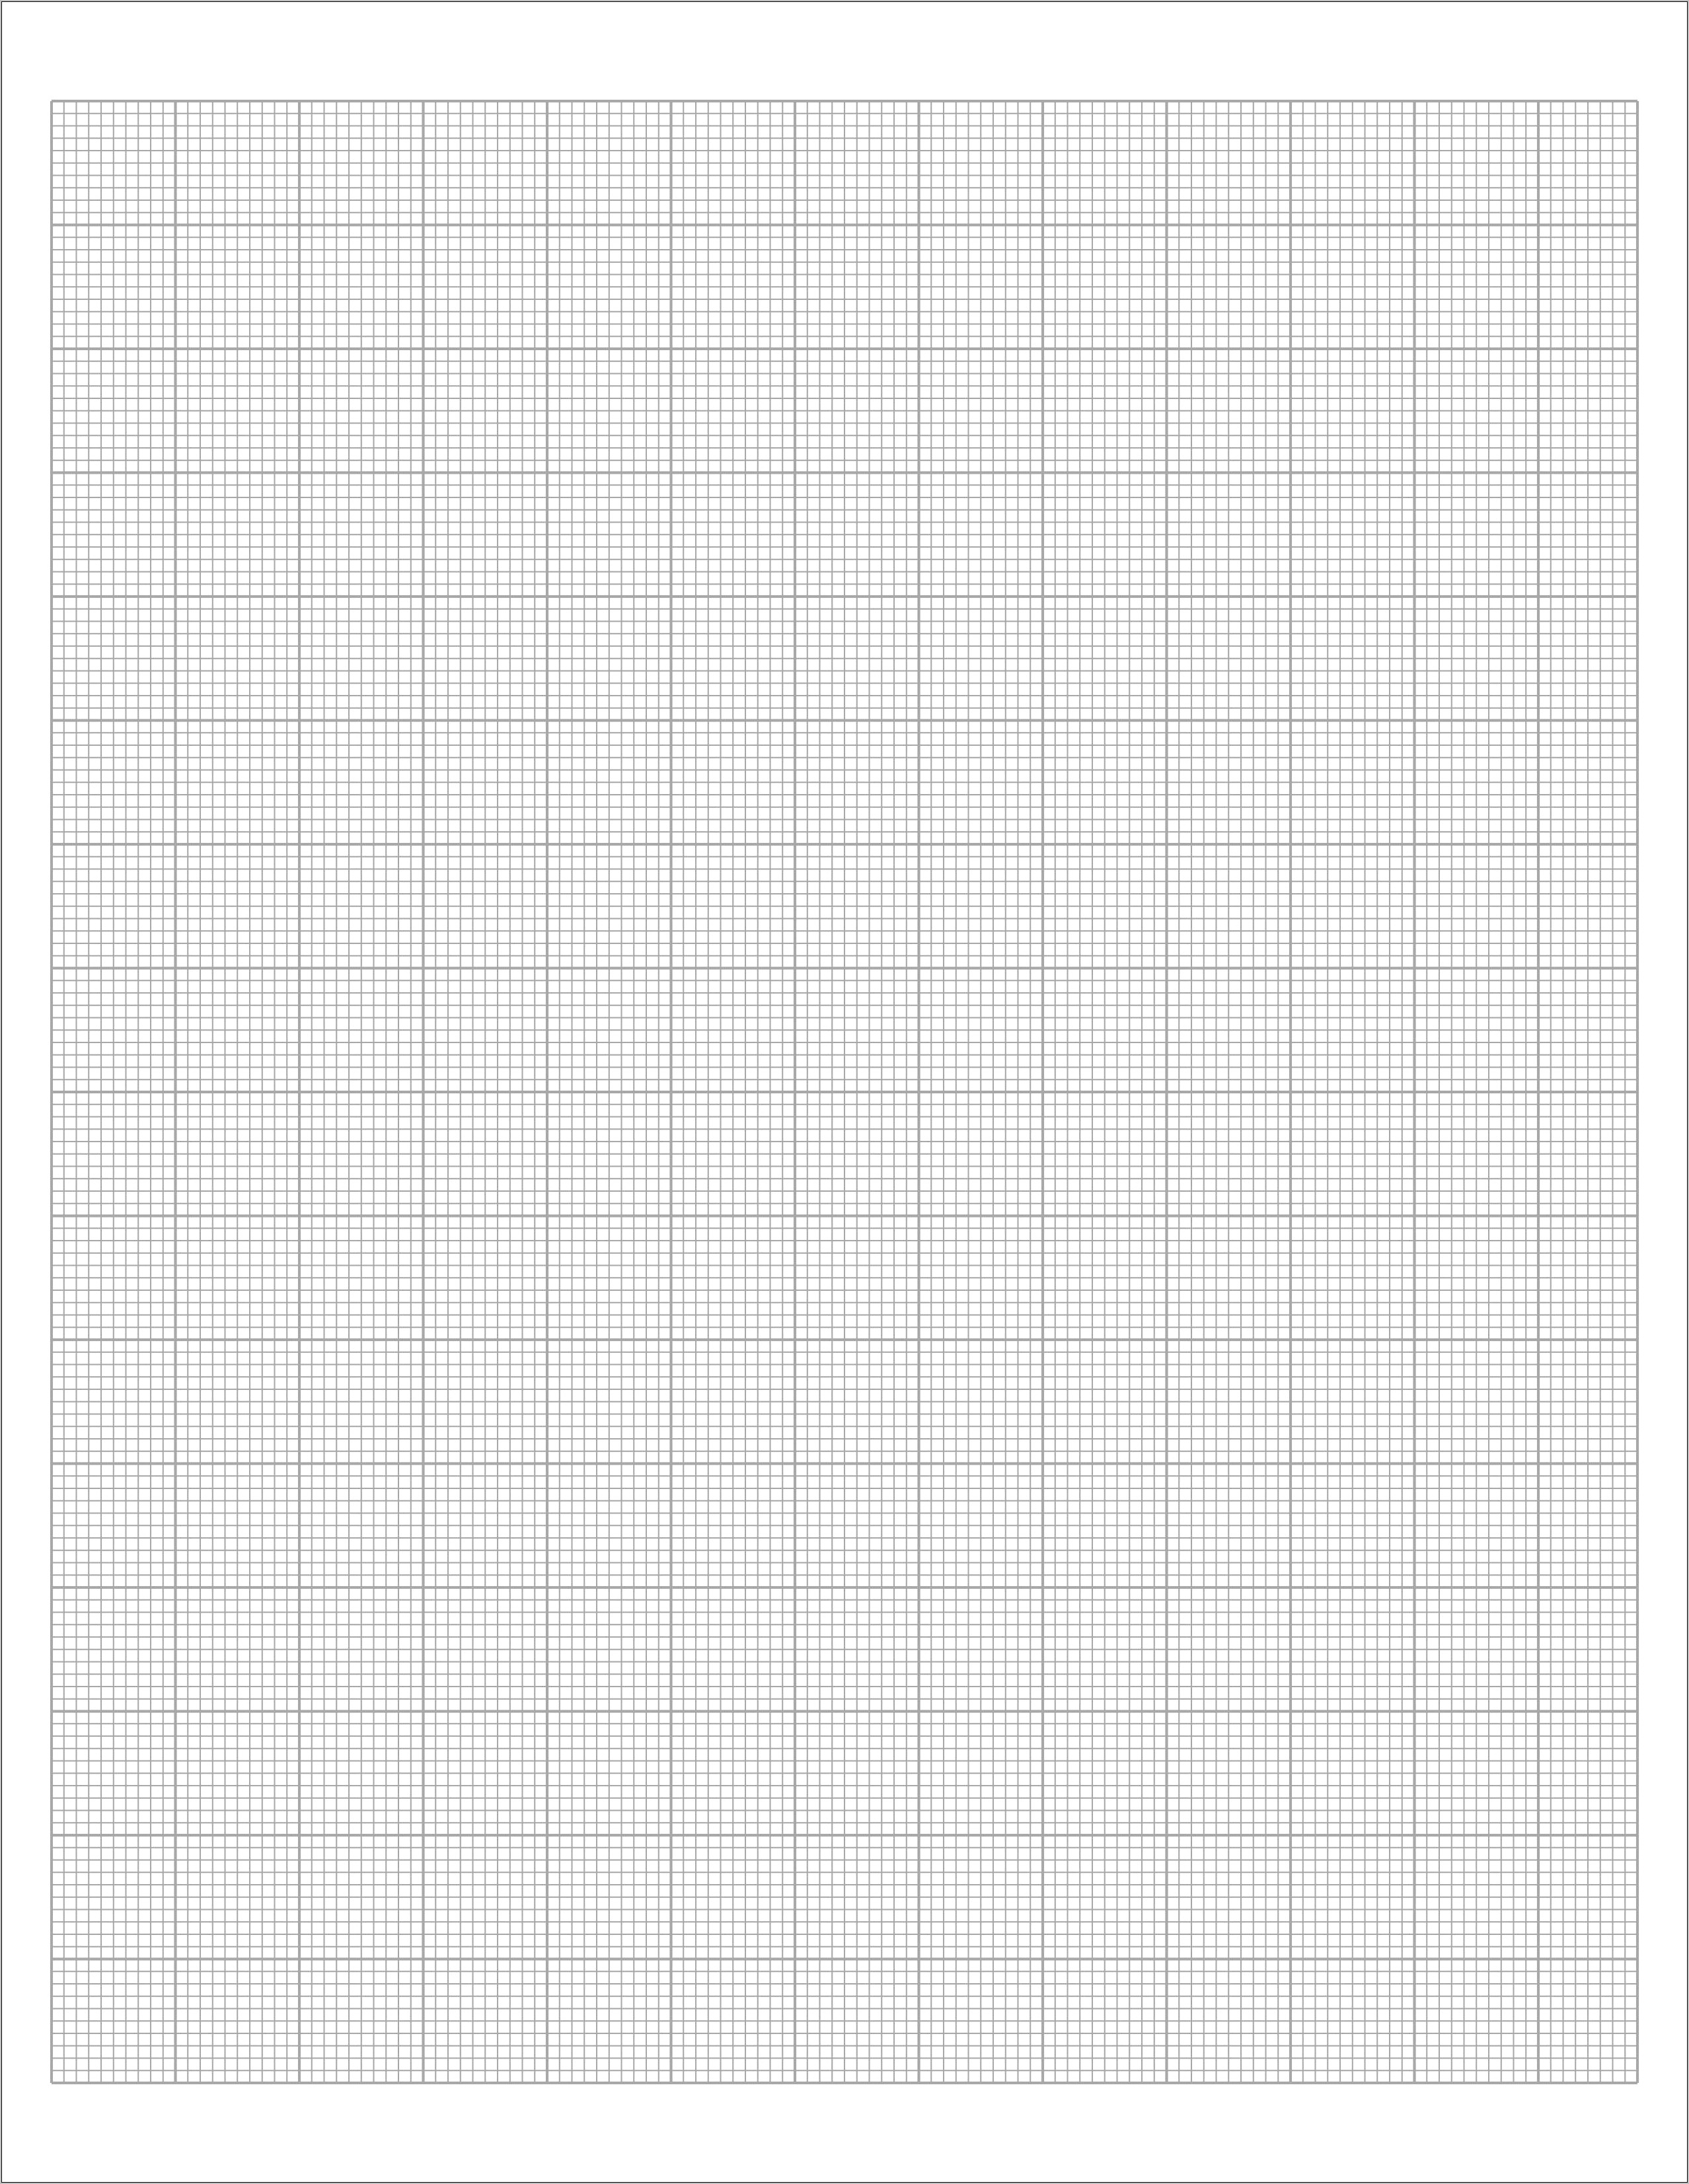 free-graph-paper-template-to-print-resume-example-gallery